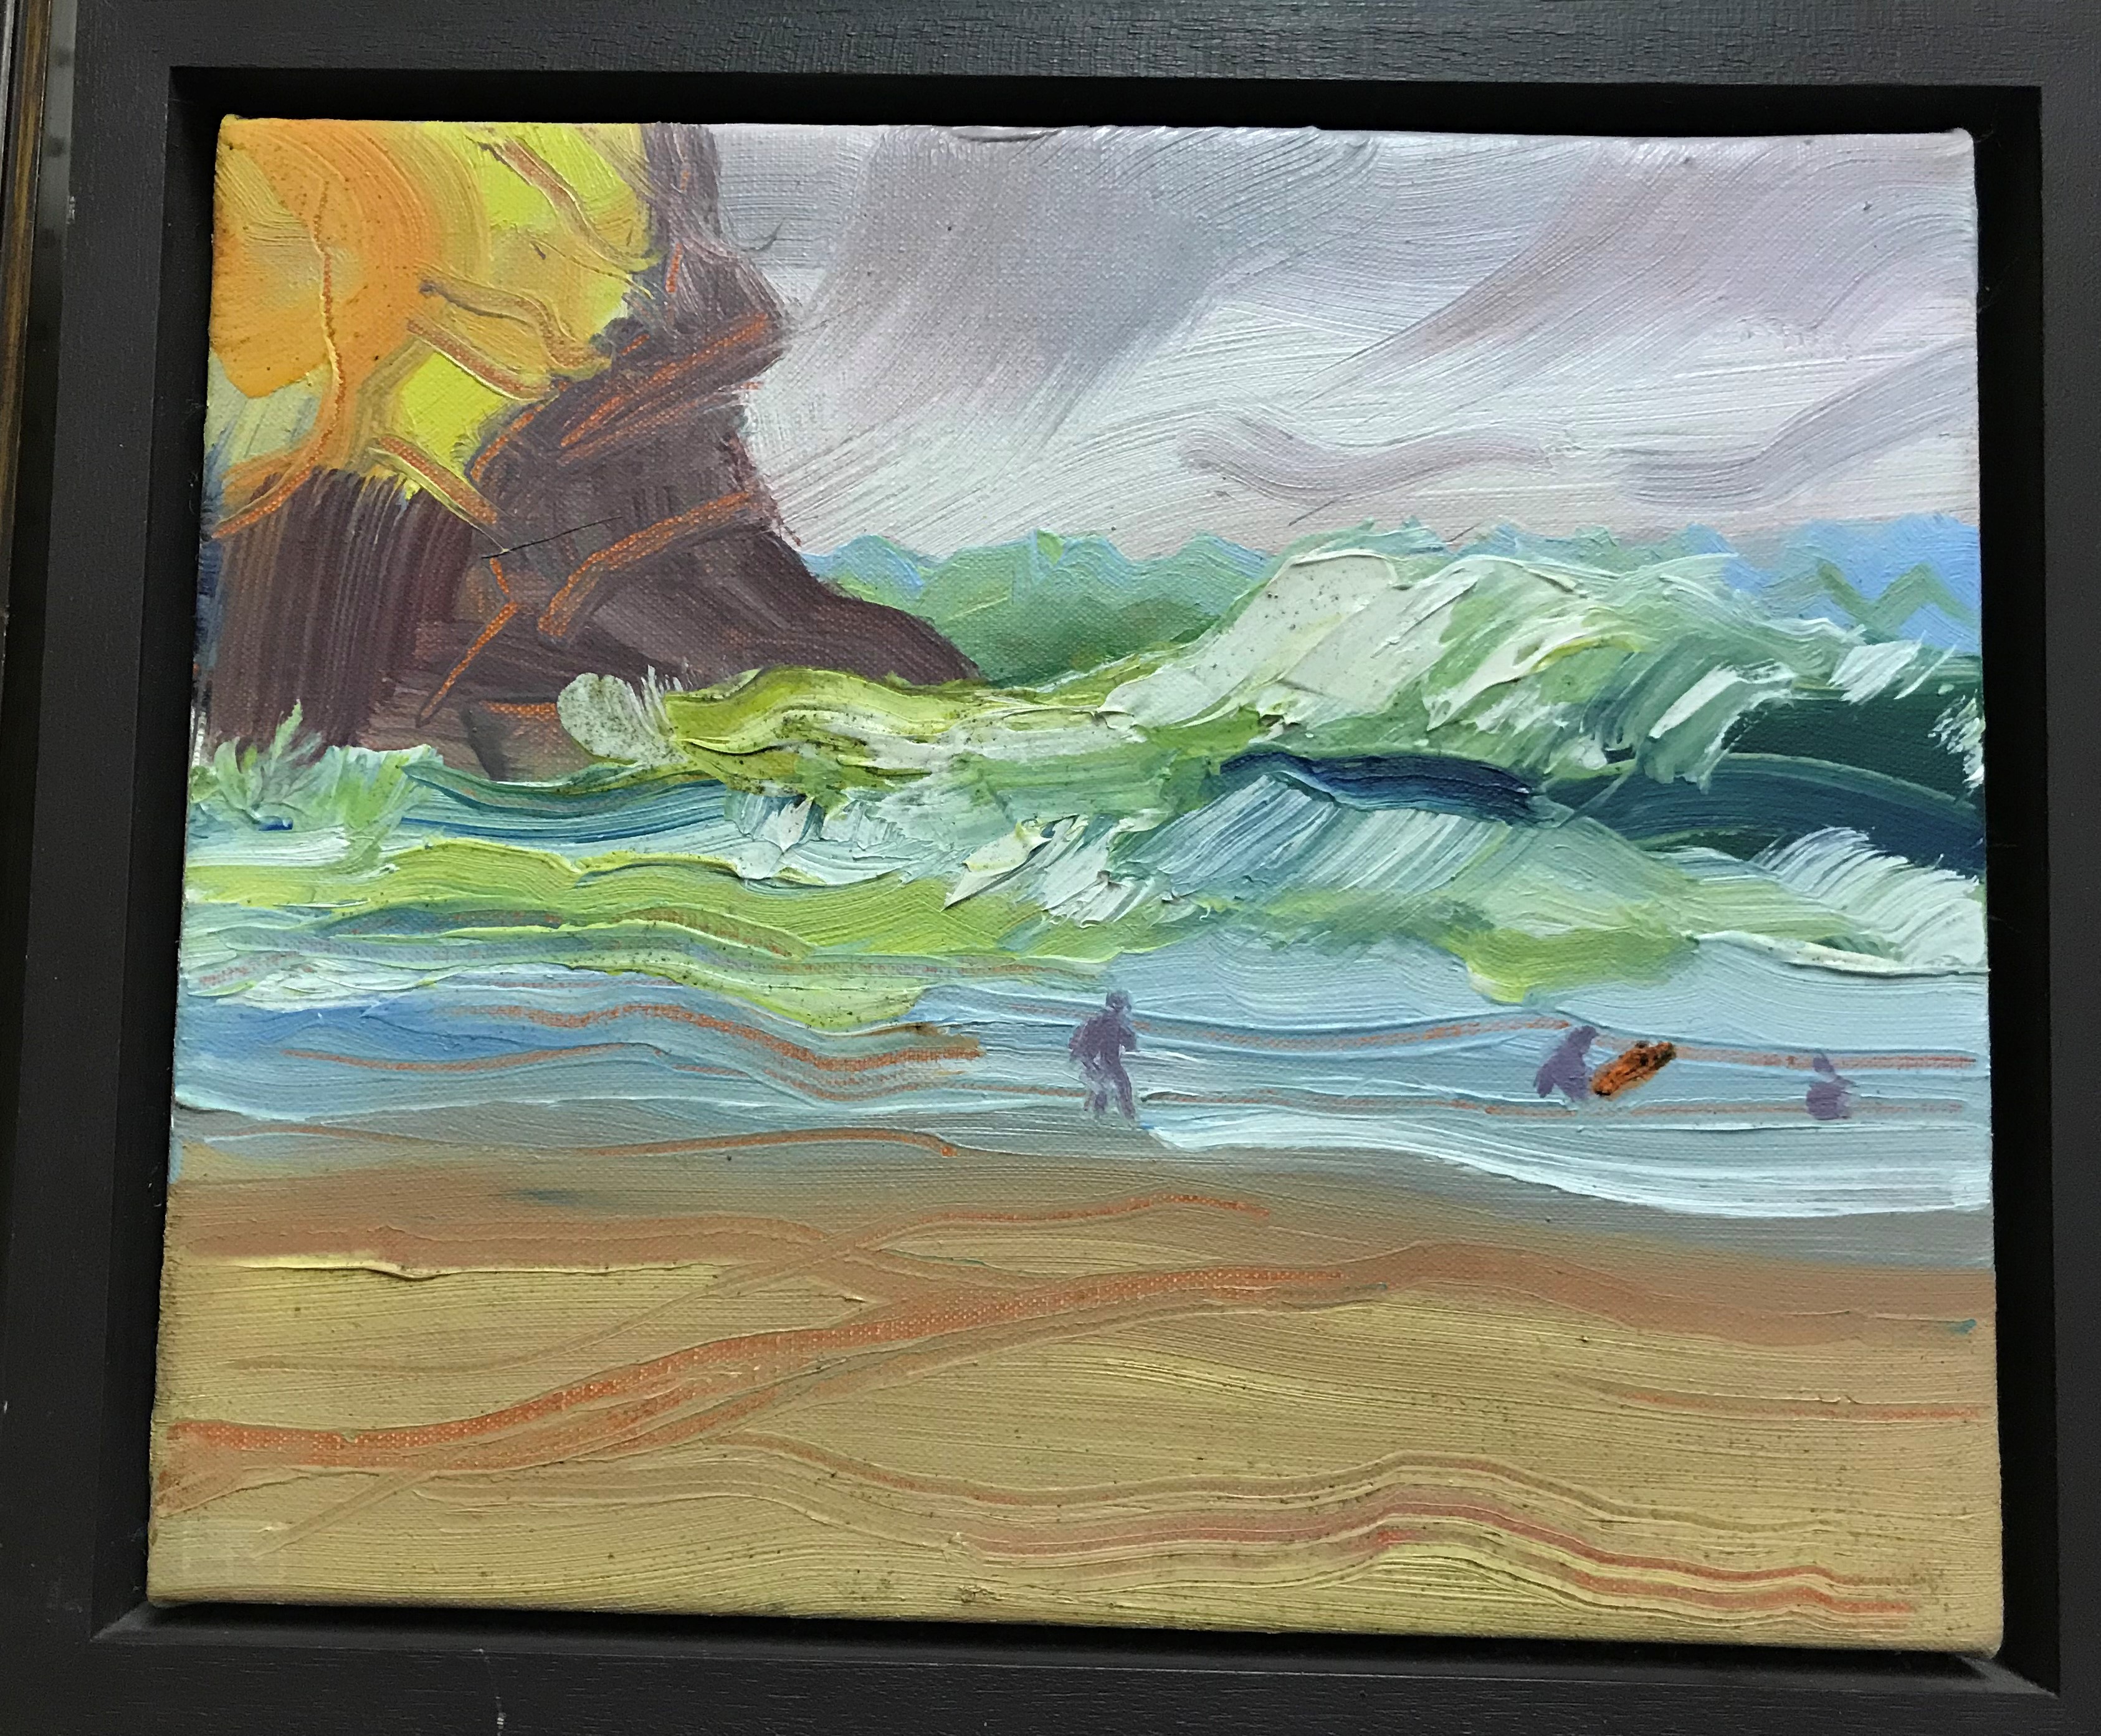 FIONA MCINTYRE "Surfing at Chapel Porth", acrylic on canvas, unsigned, inscribed on label verso,